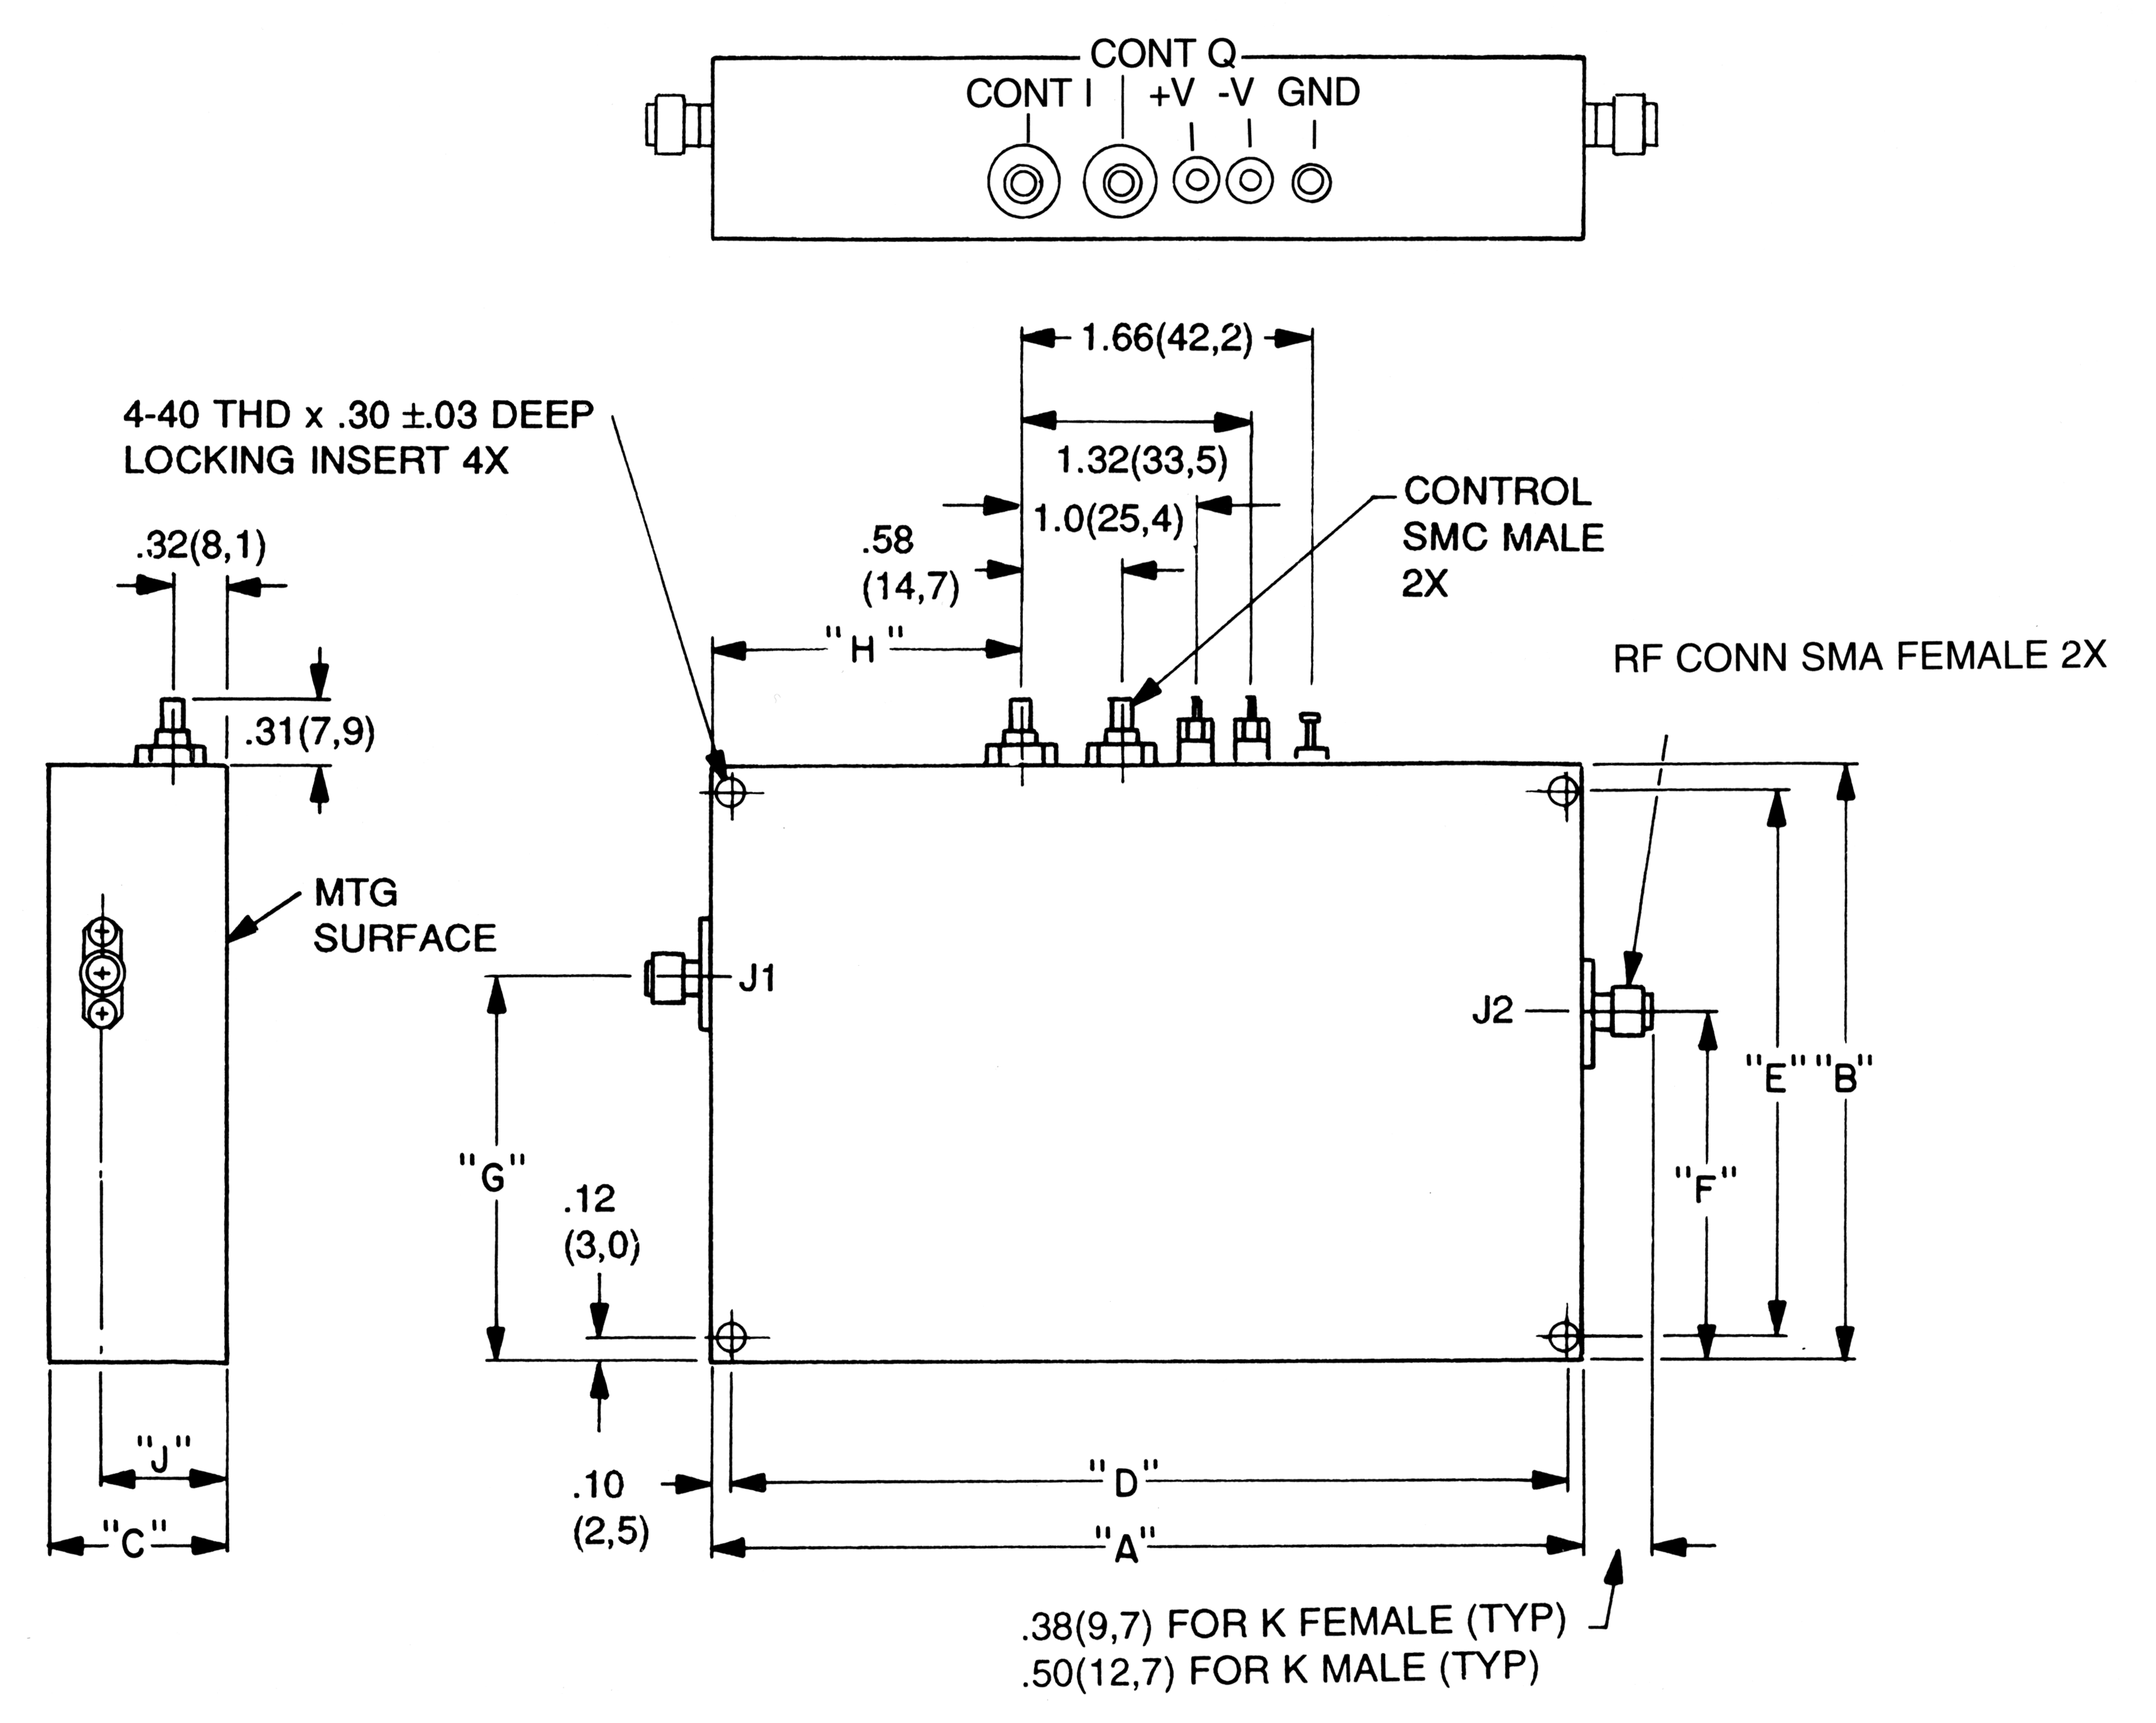 Series 72 IQ vector modulator dimensions and weight